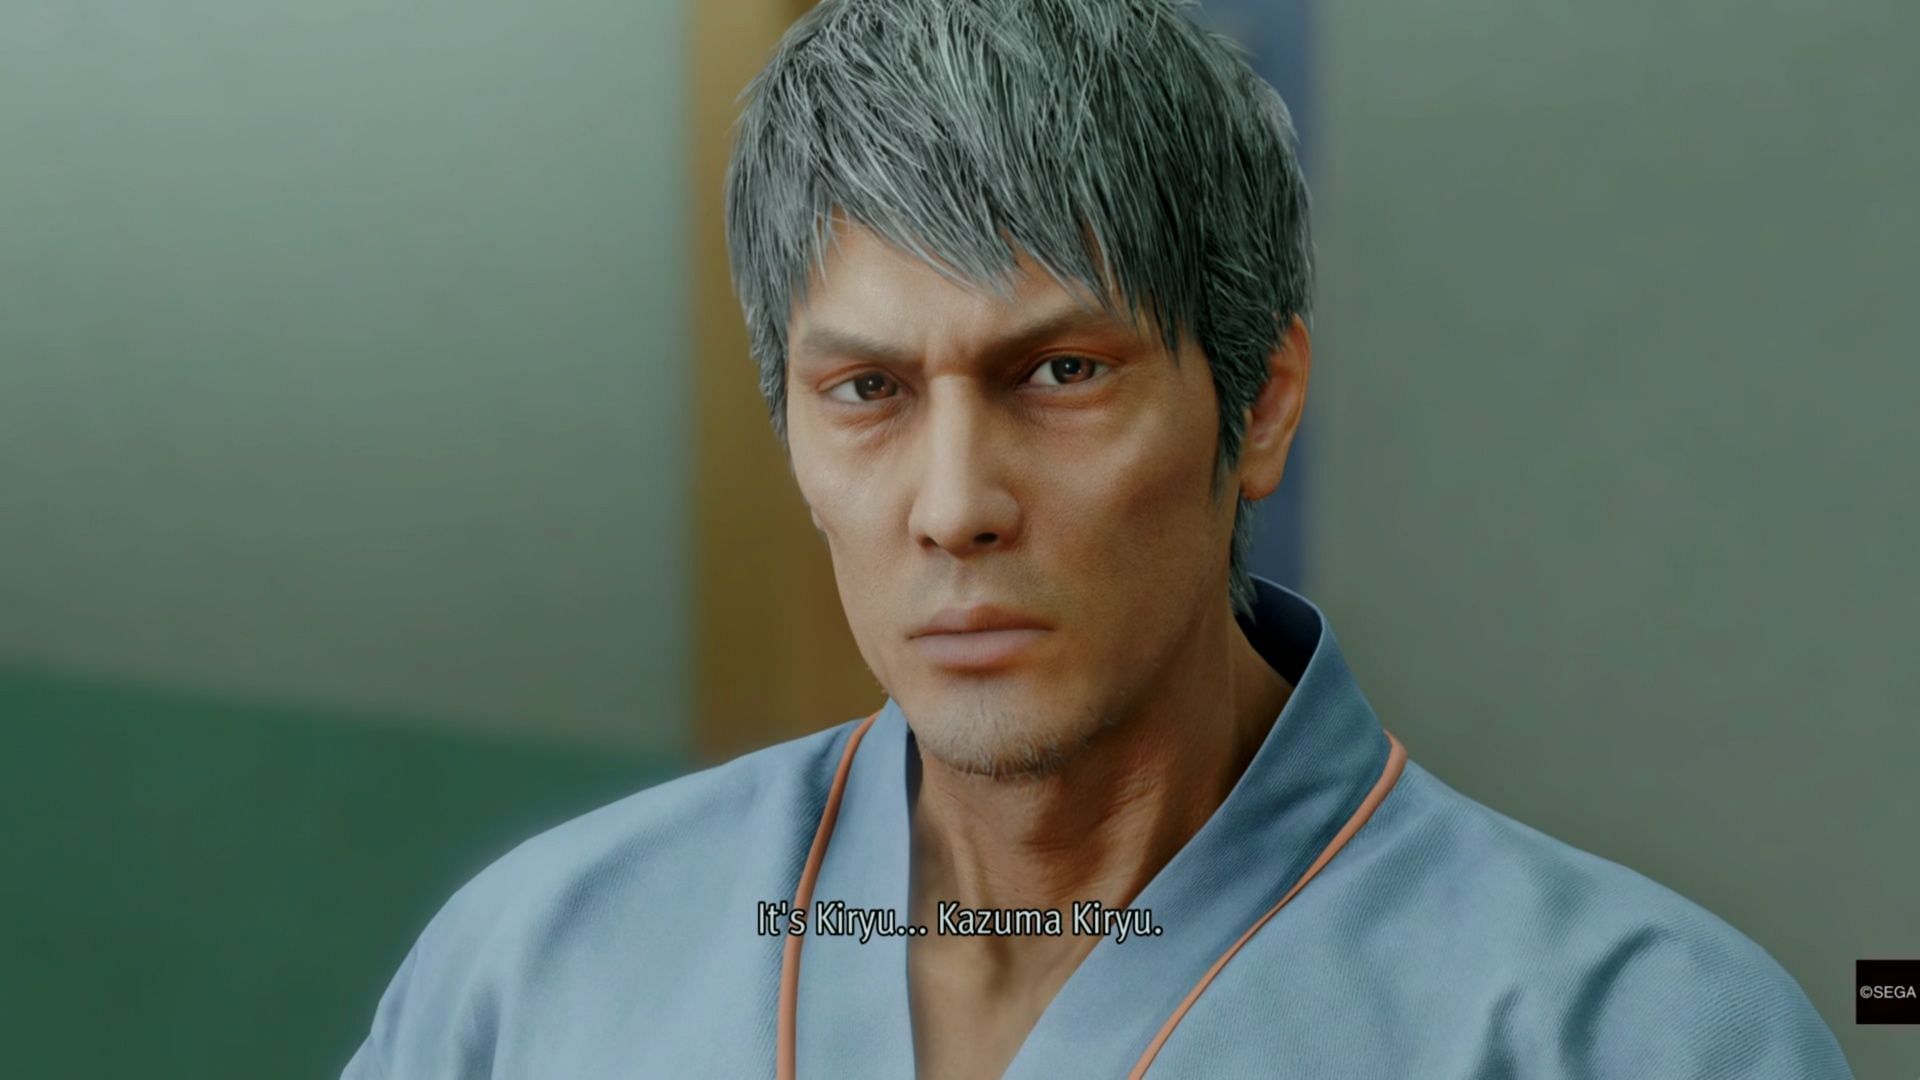 Kiryu is getting treatment after Like a Dragon Infinite Wealth, but he does not look well (Image via SEGA)